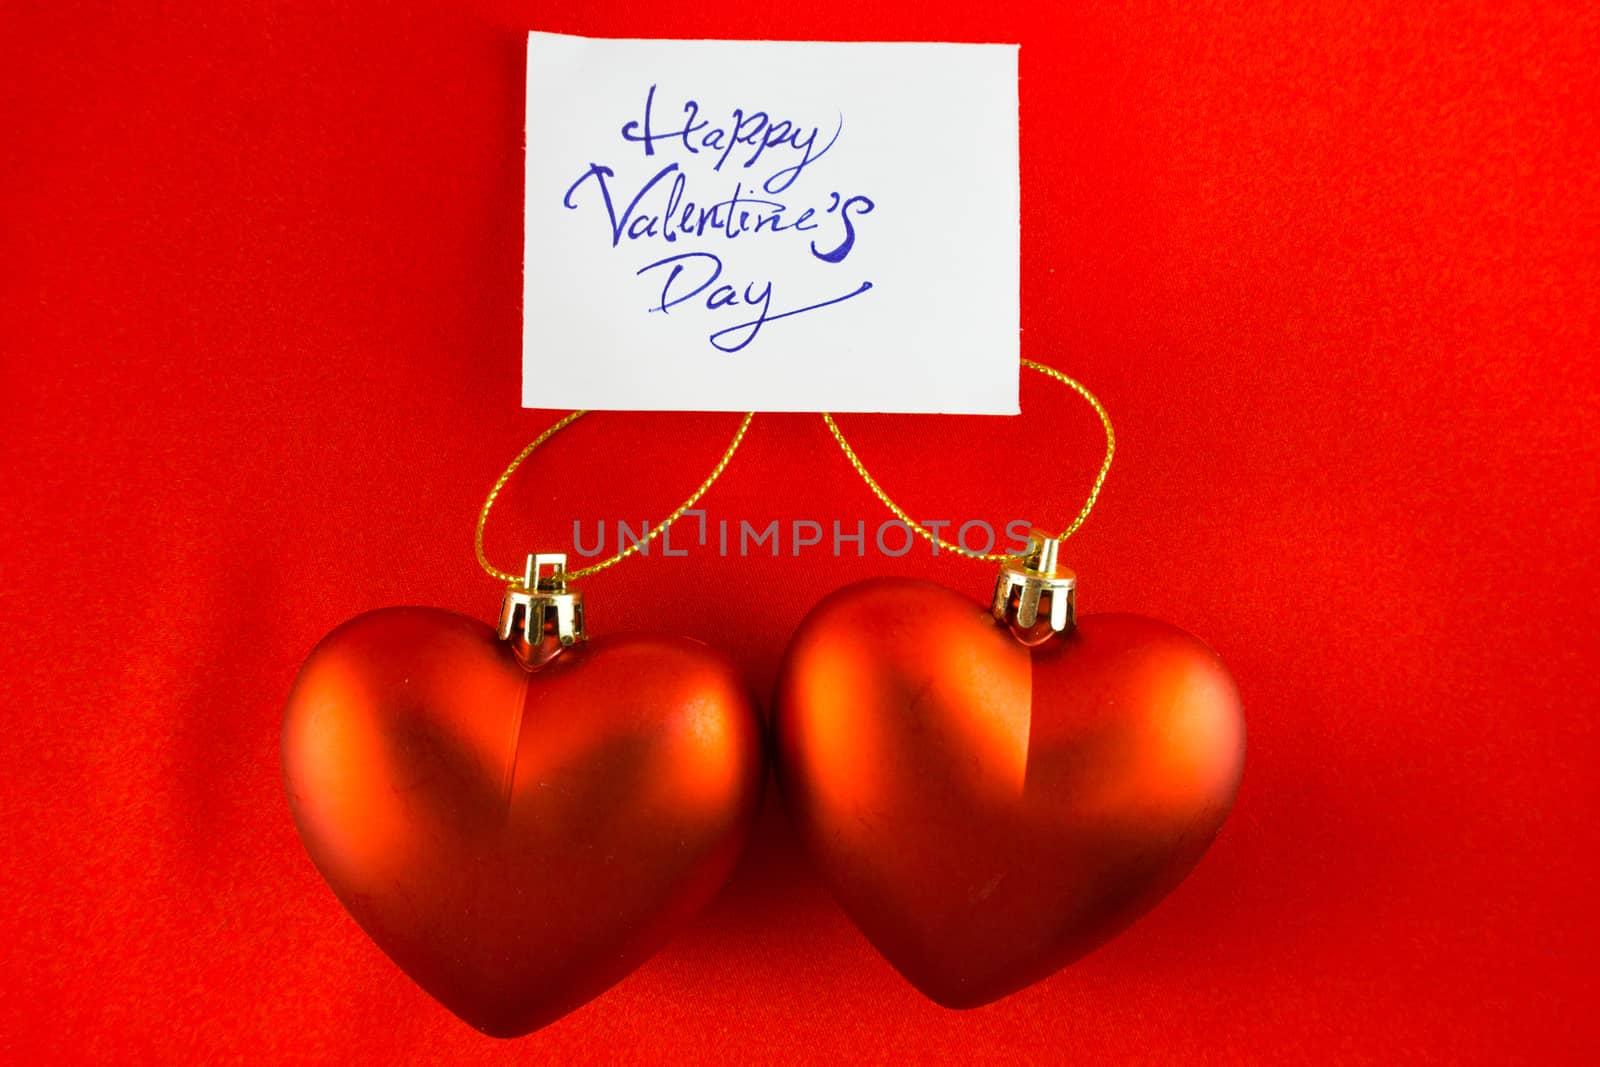 Red heart Valentines with message card on red background Image o by nopparats